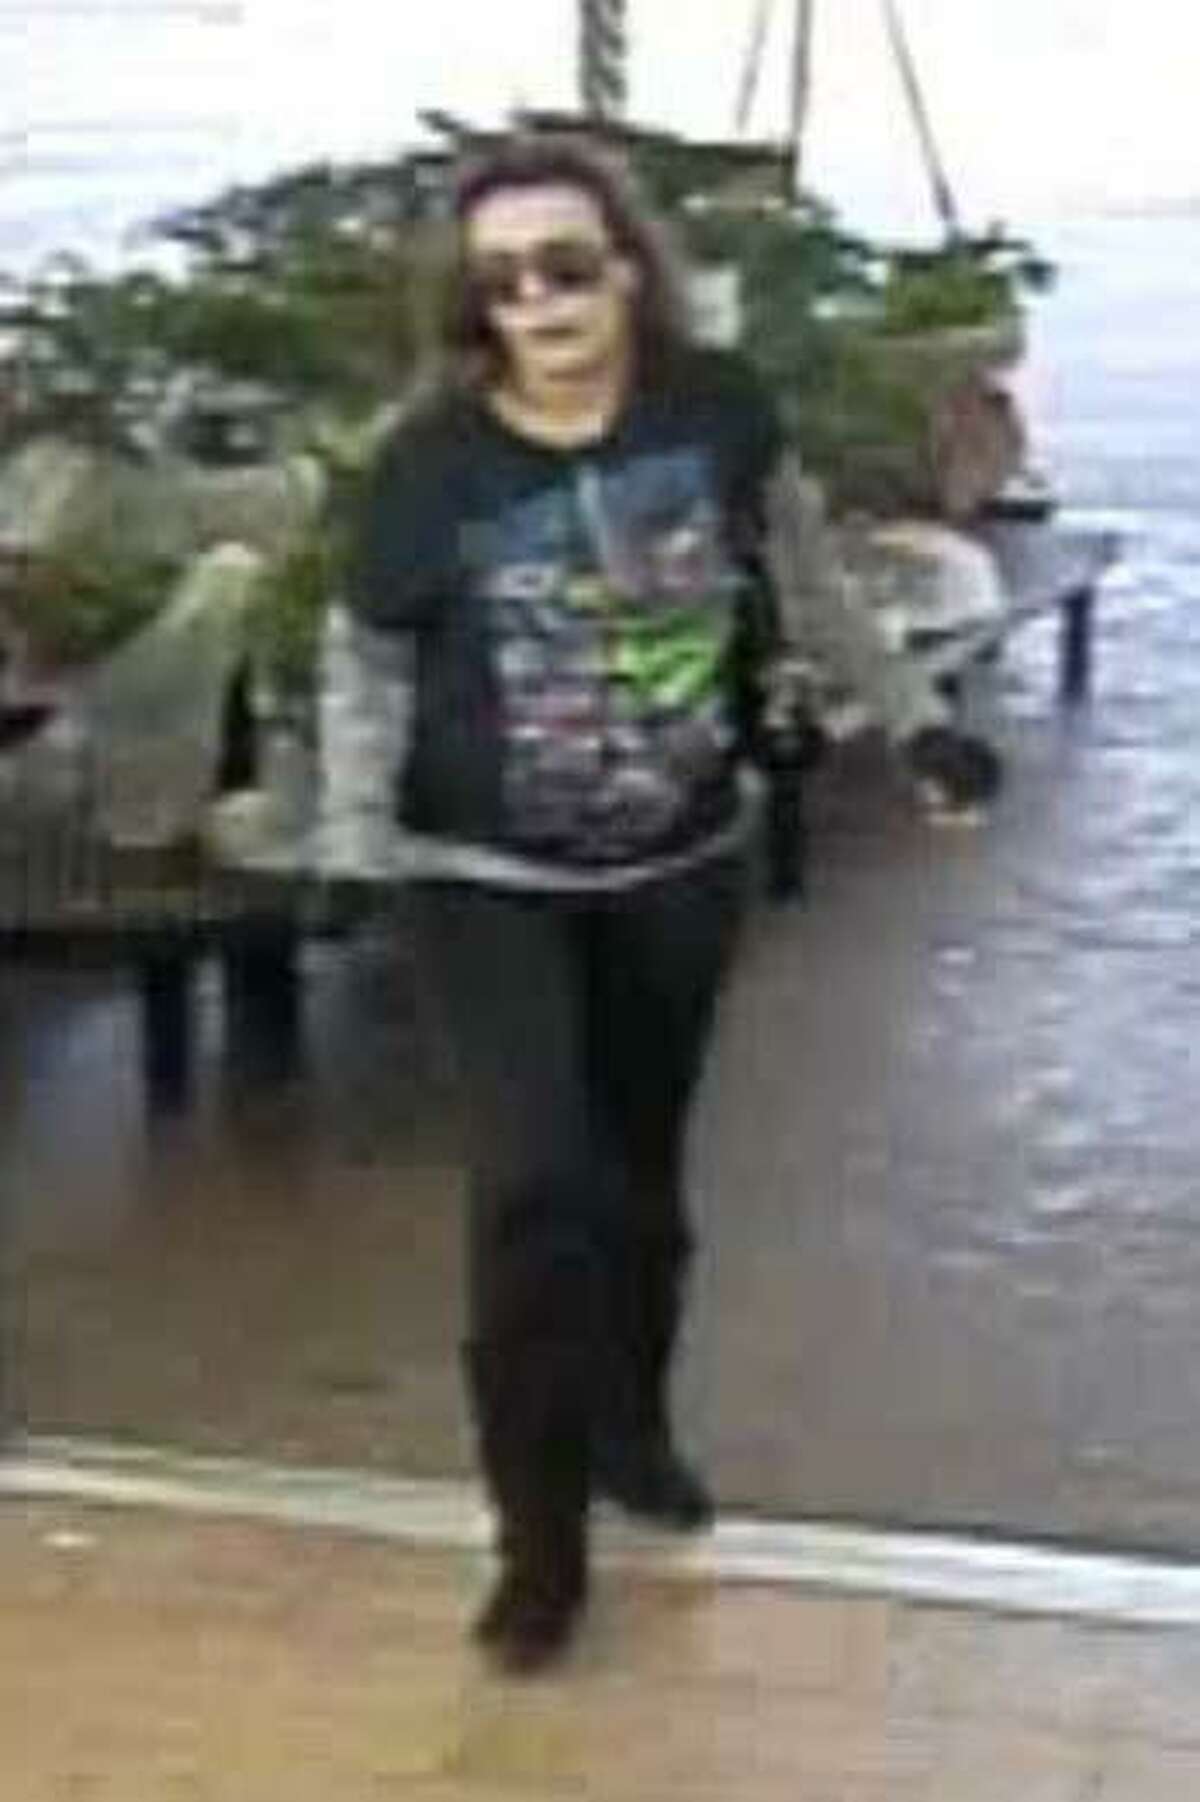 A shoplifting suspect is seen Dec. 6 on surveillance camera at the Woodlands Parkway Walmart in Spring.